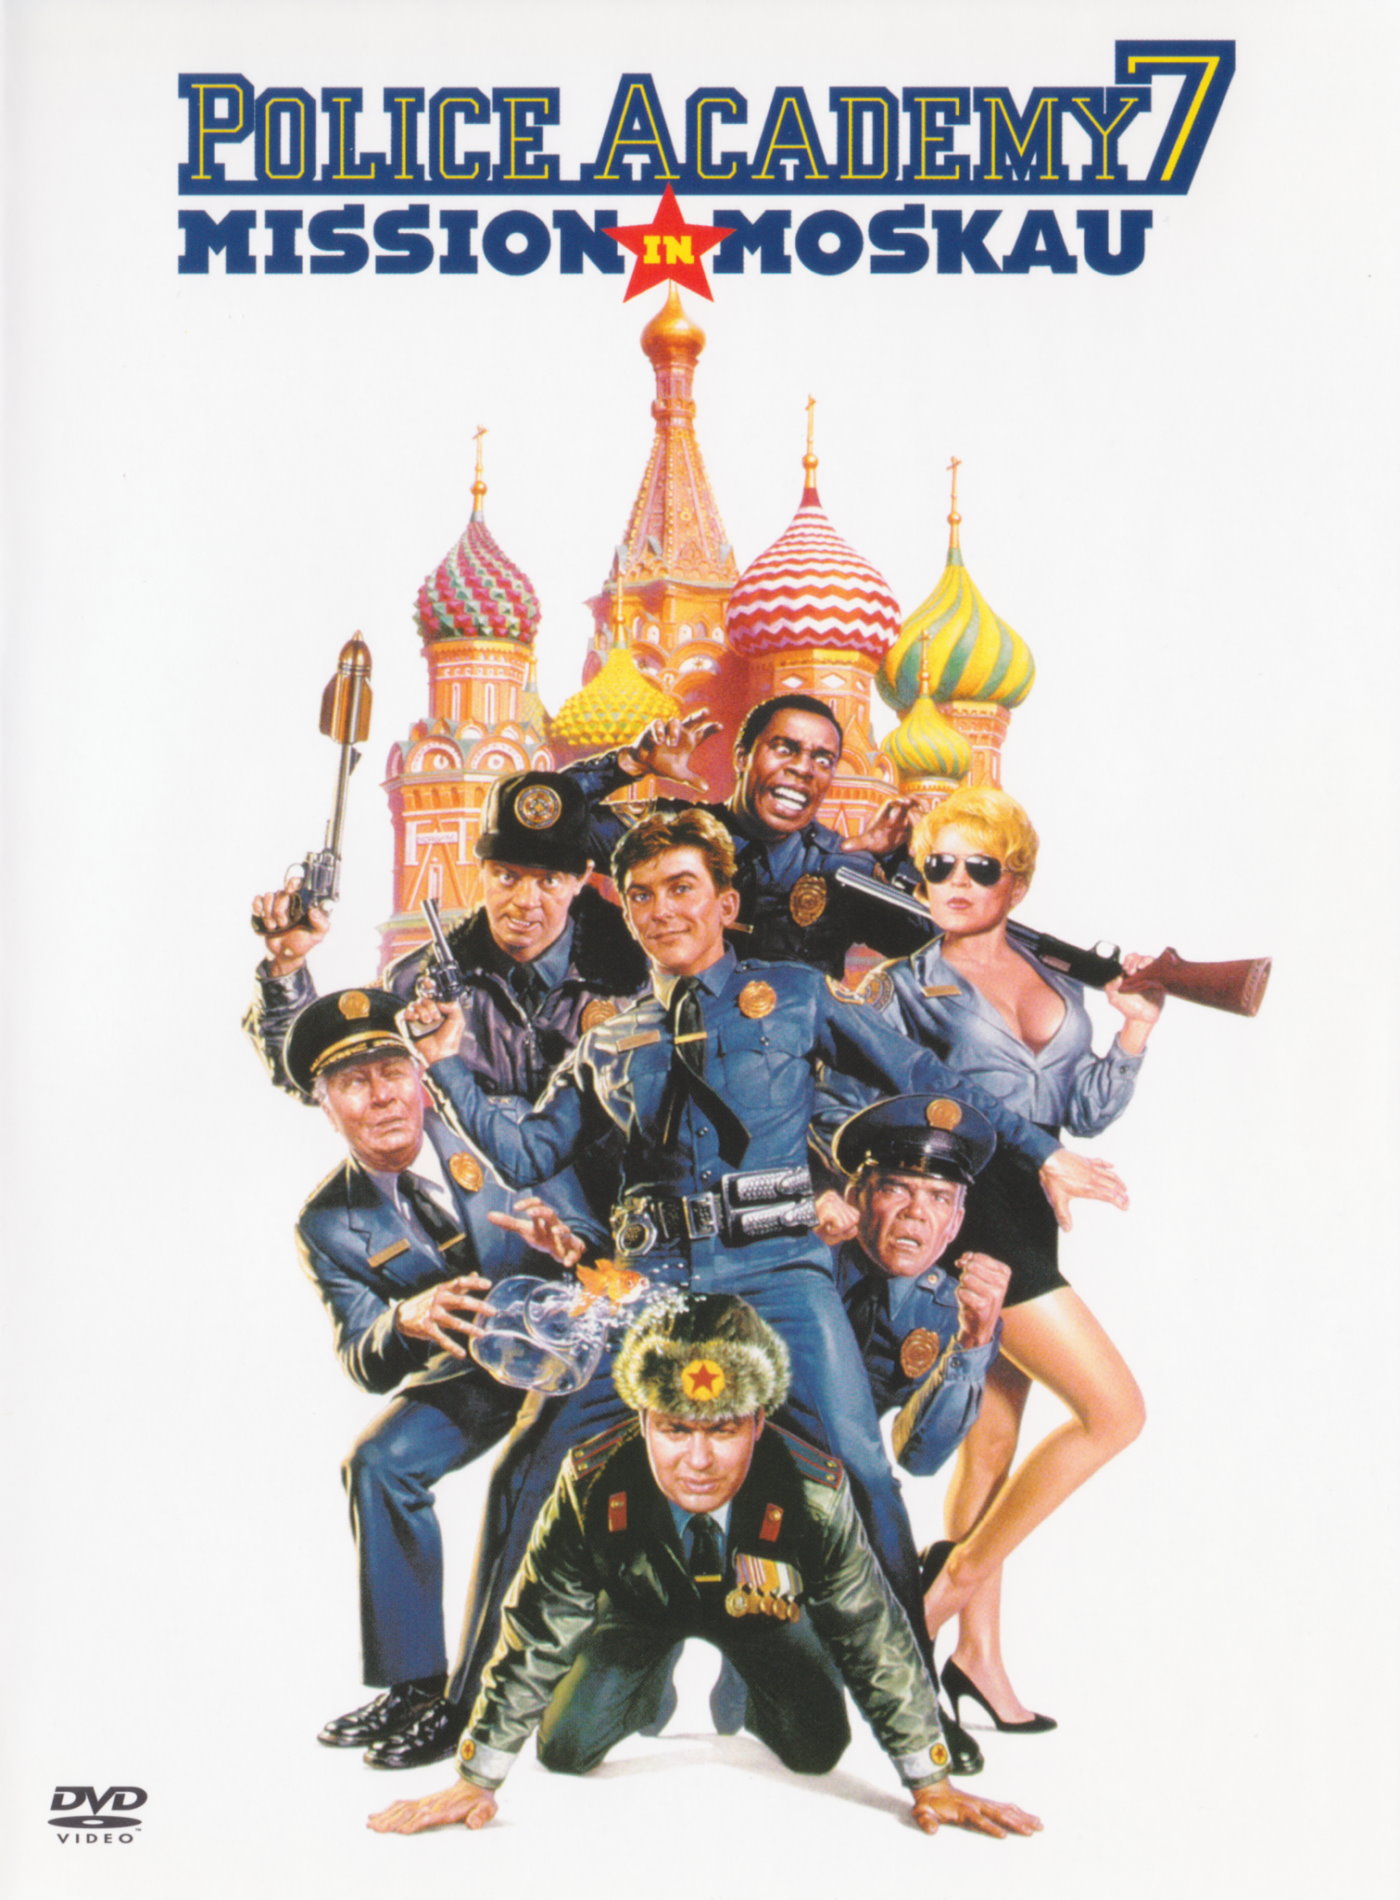 Cover - Police Academy 7 - Mission in Moskau.jpg